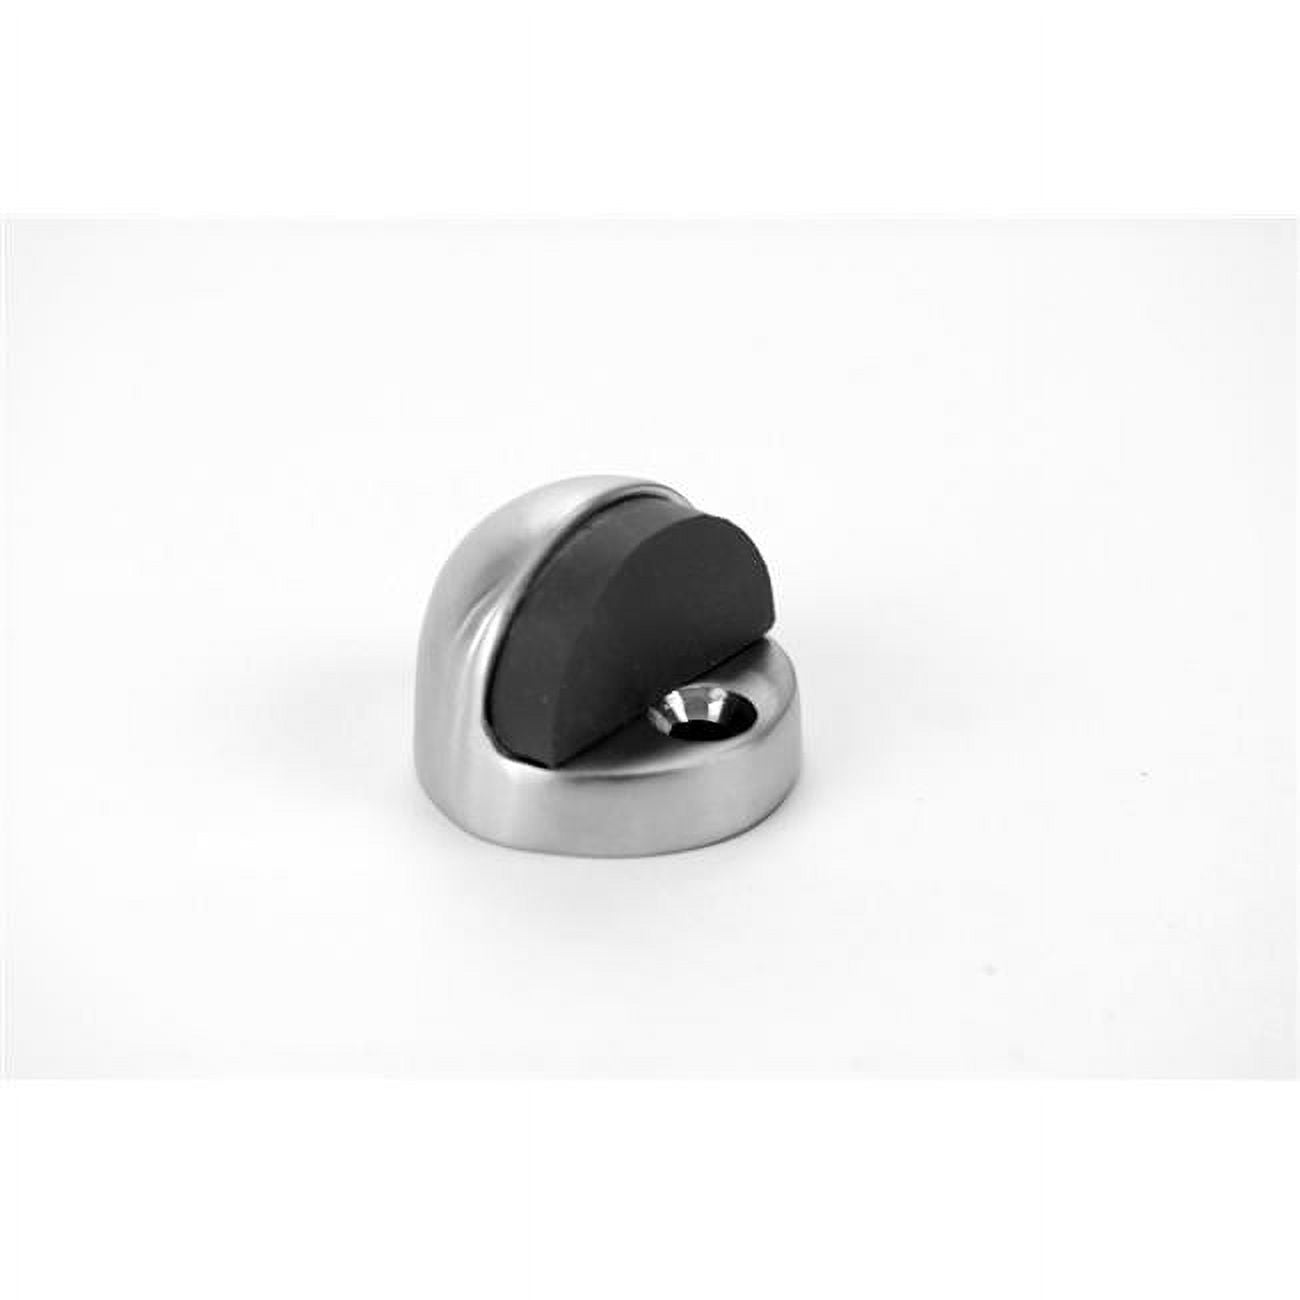 1442-626 Brushed Chrome Door High Dome Stop -  Don-Jo Manufacturing, 1442 626